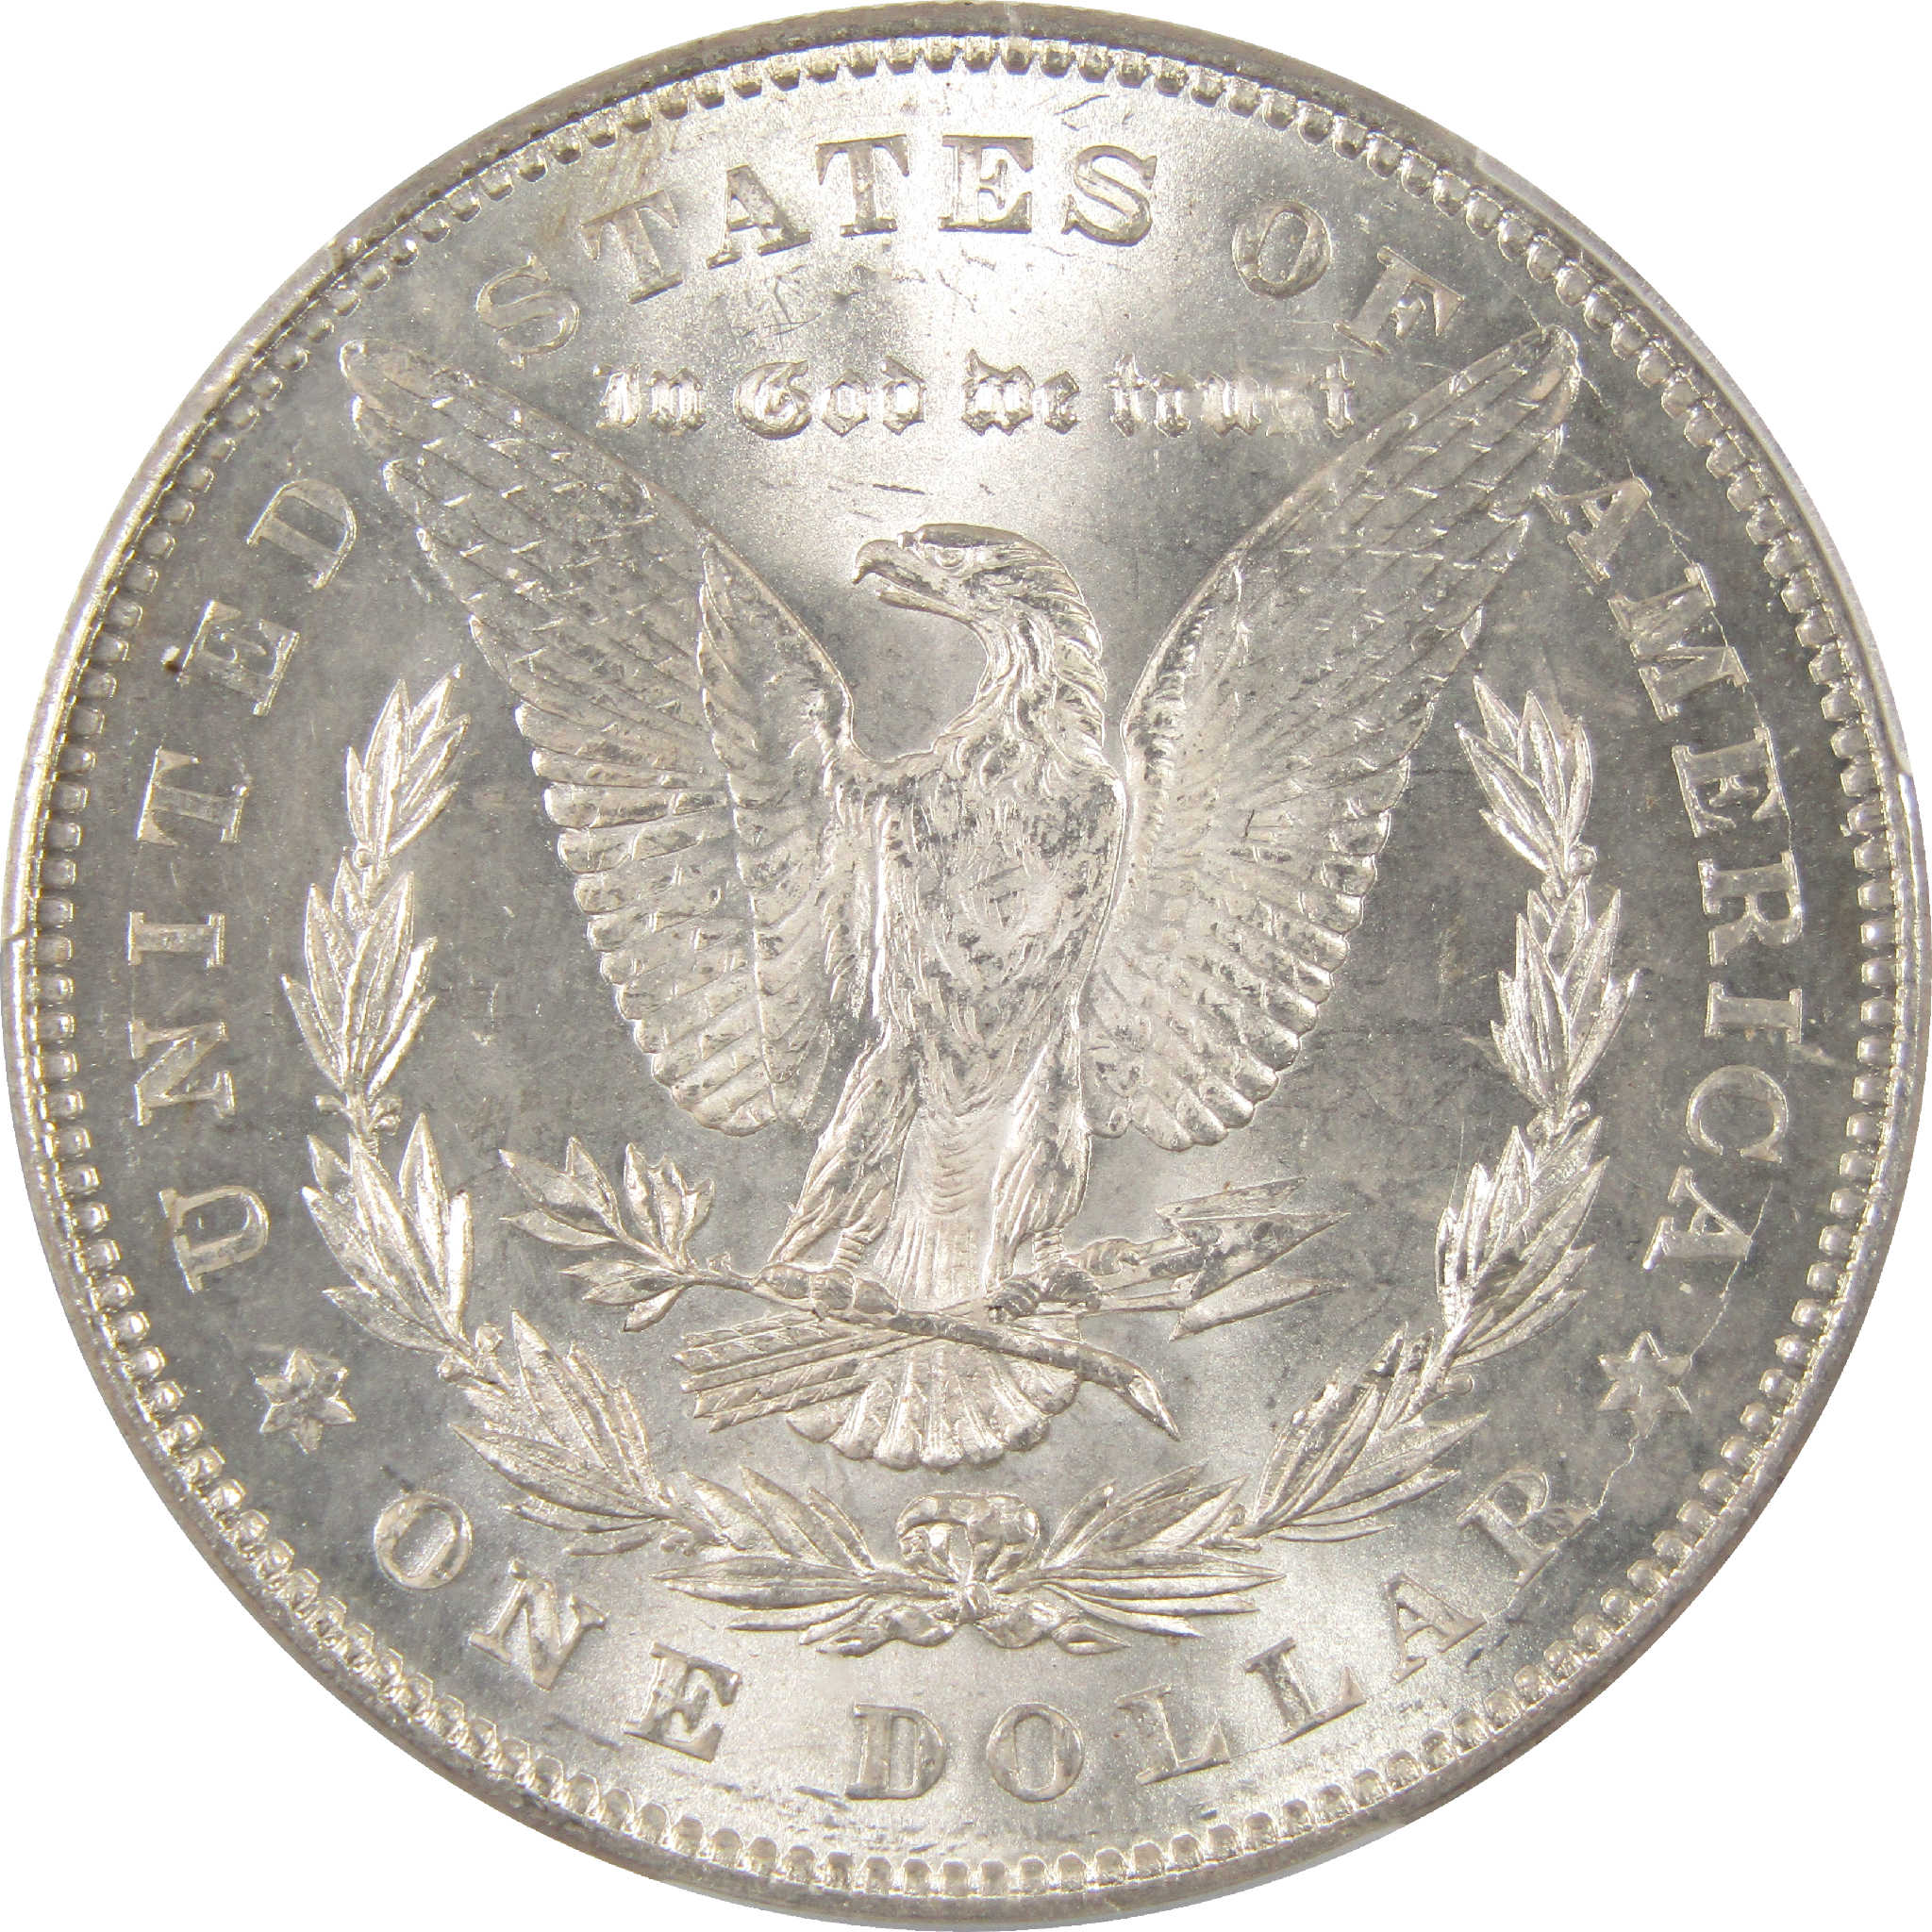 1878 7TF Rev 78 Morgan Dollar MS 62 PCGS Silver $1 Unc SKU:I11322 - Morgan coin - Morgan silver dollar - Morgan silver dollar for sale - Profile Coins &amp; Collectibles